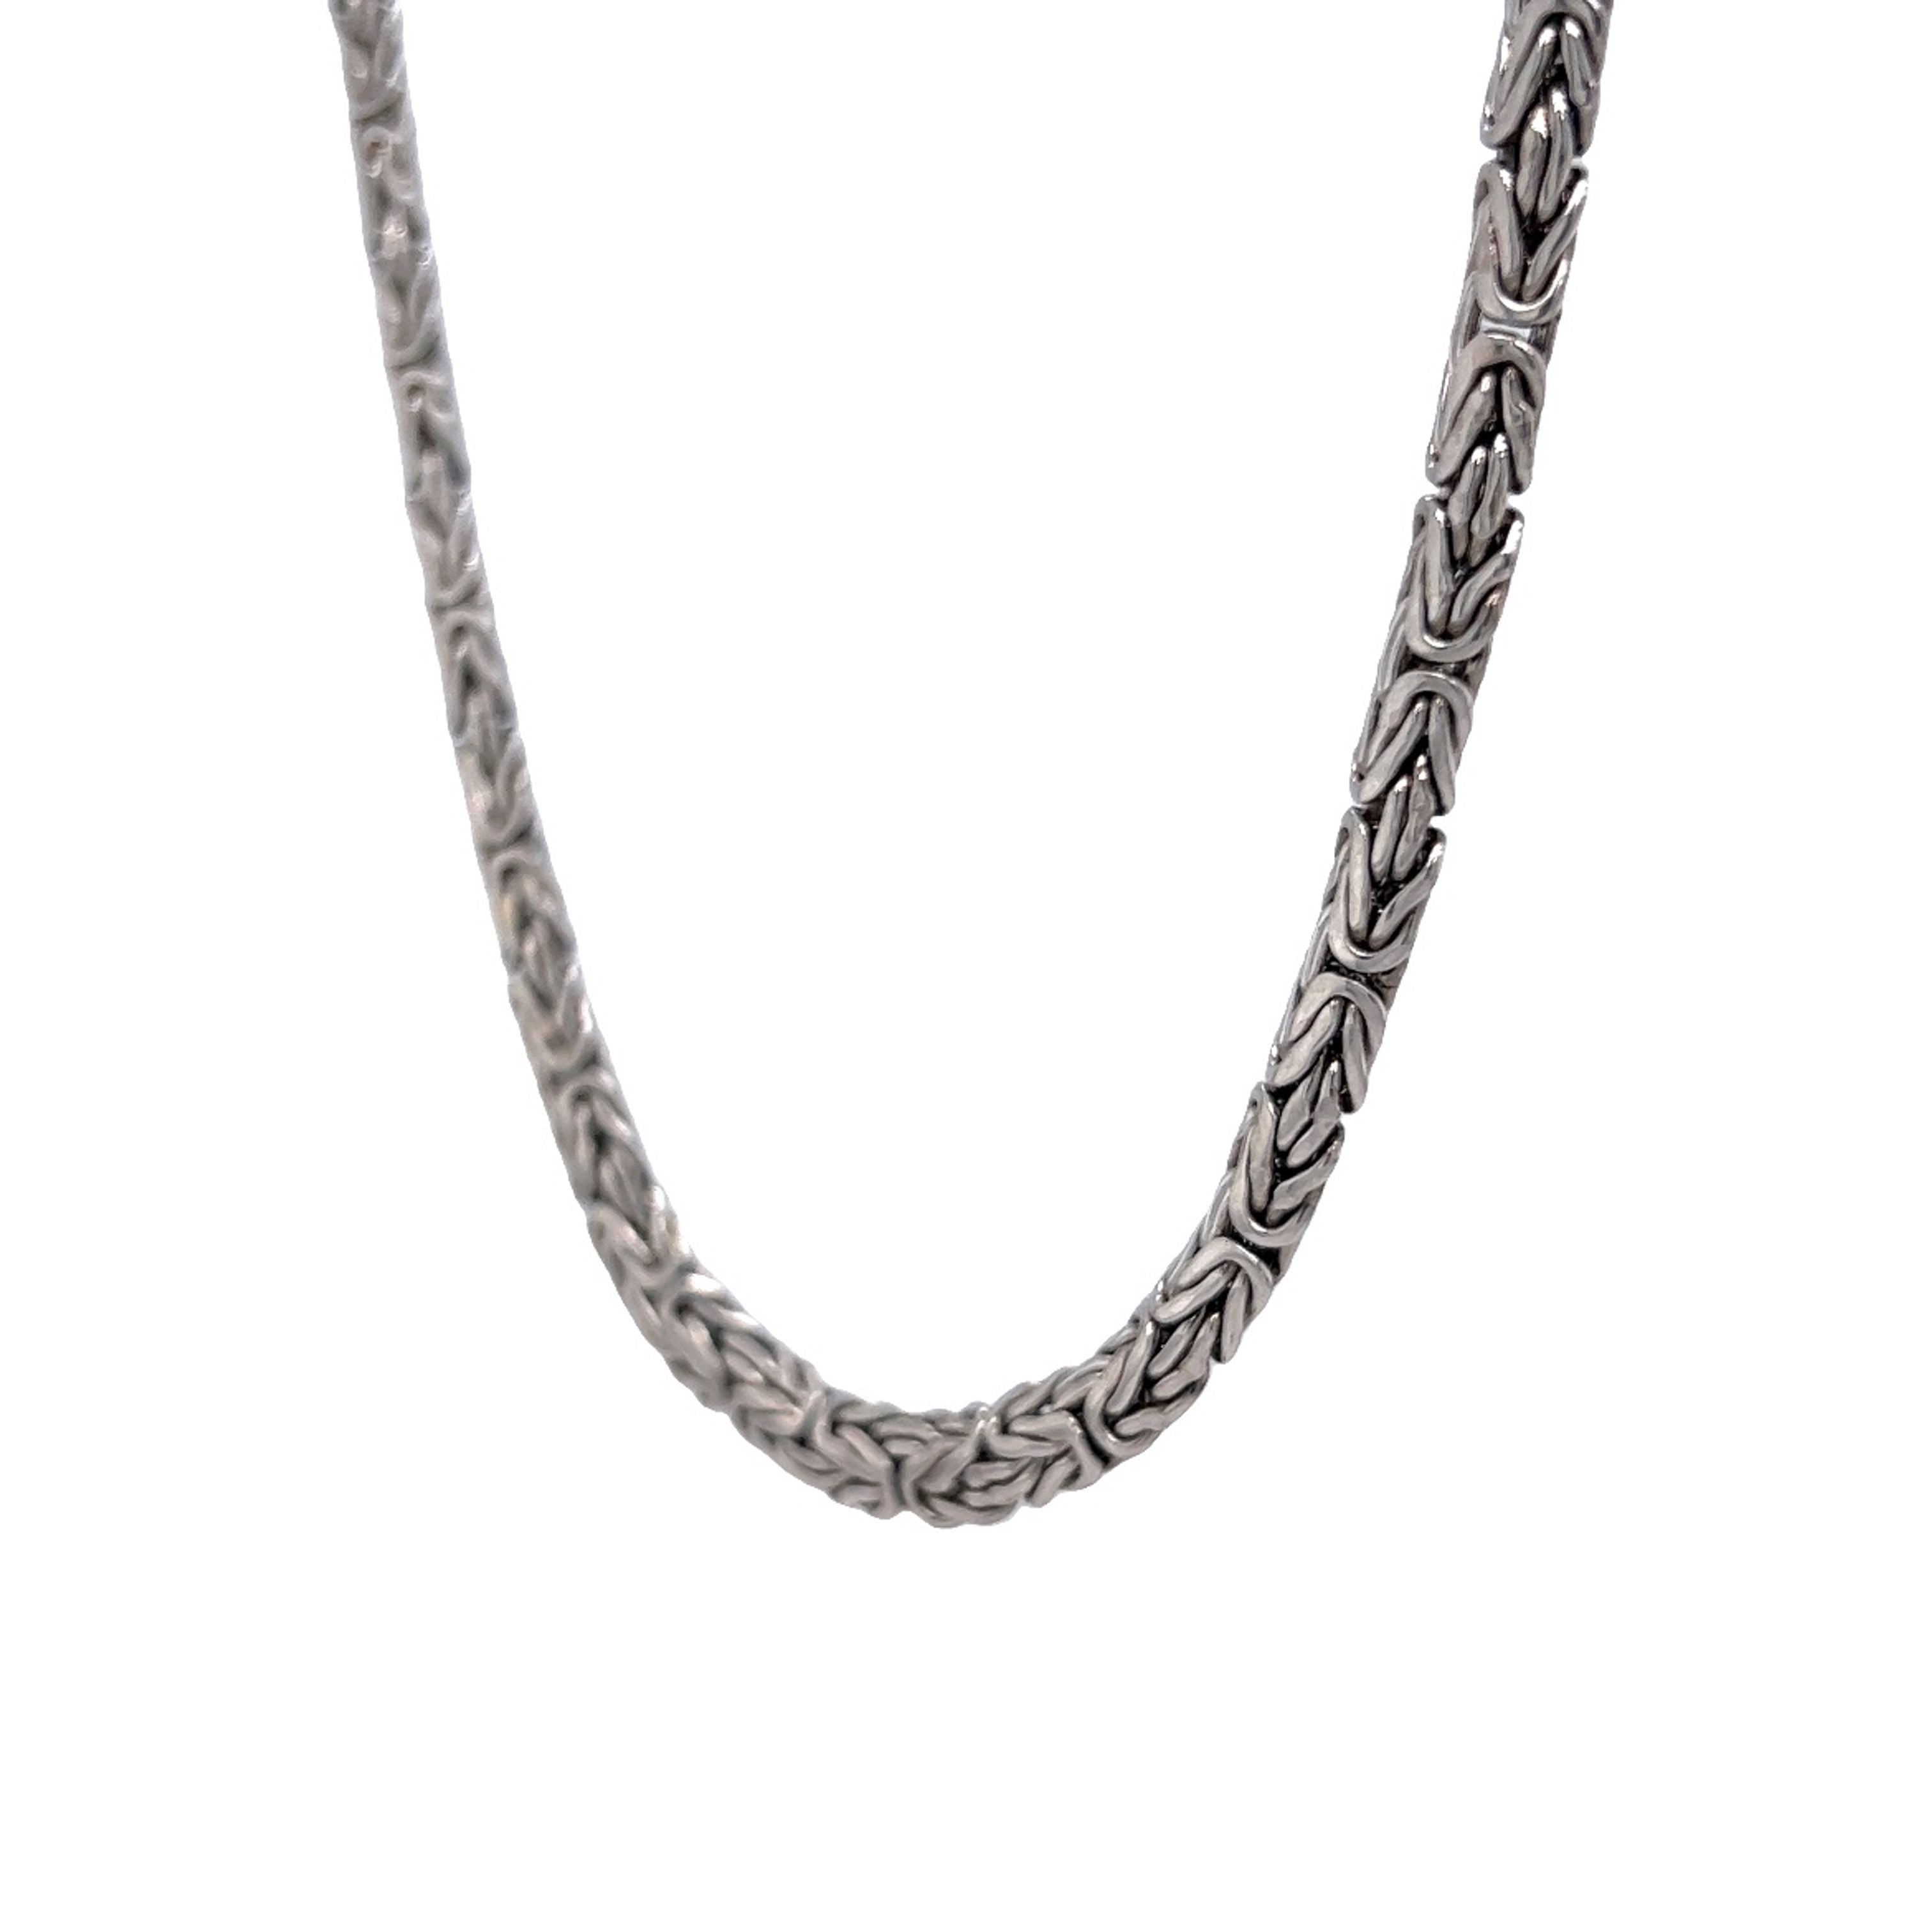 White Gold and Diamond Rondel Rope Chain Necklace by Fope - Turgeon Raine